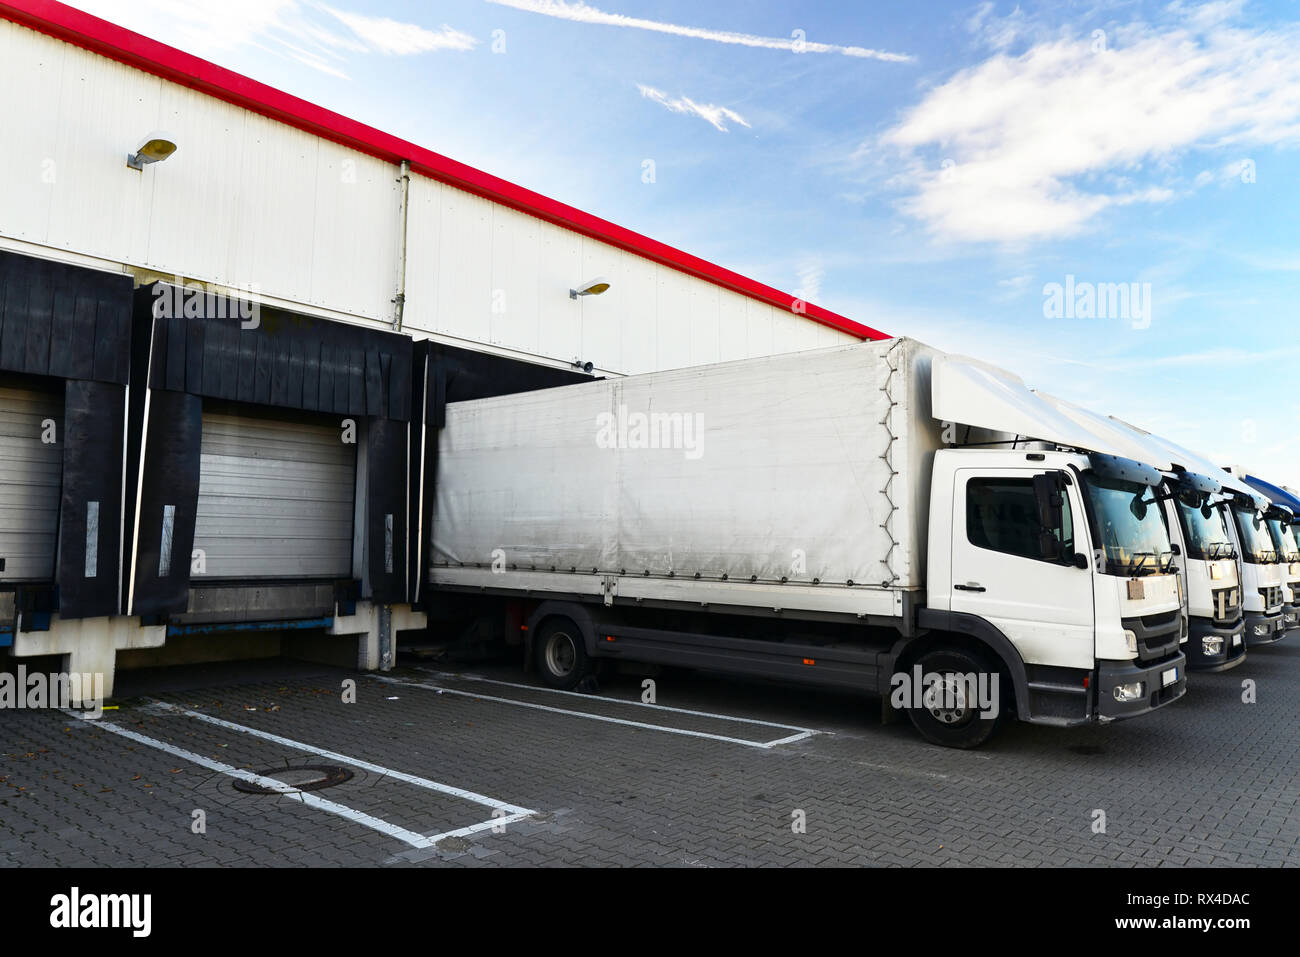 logistics and goods storage - loading and unloading of goods for transport by truck Stock Photo